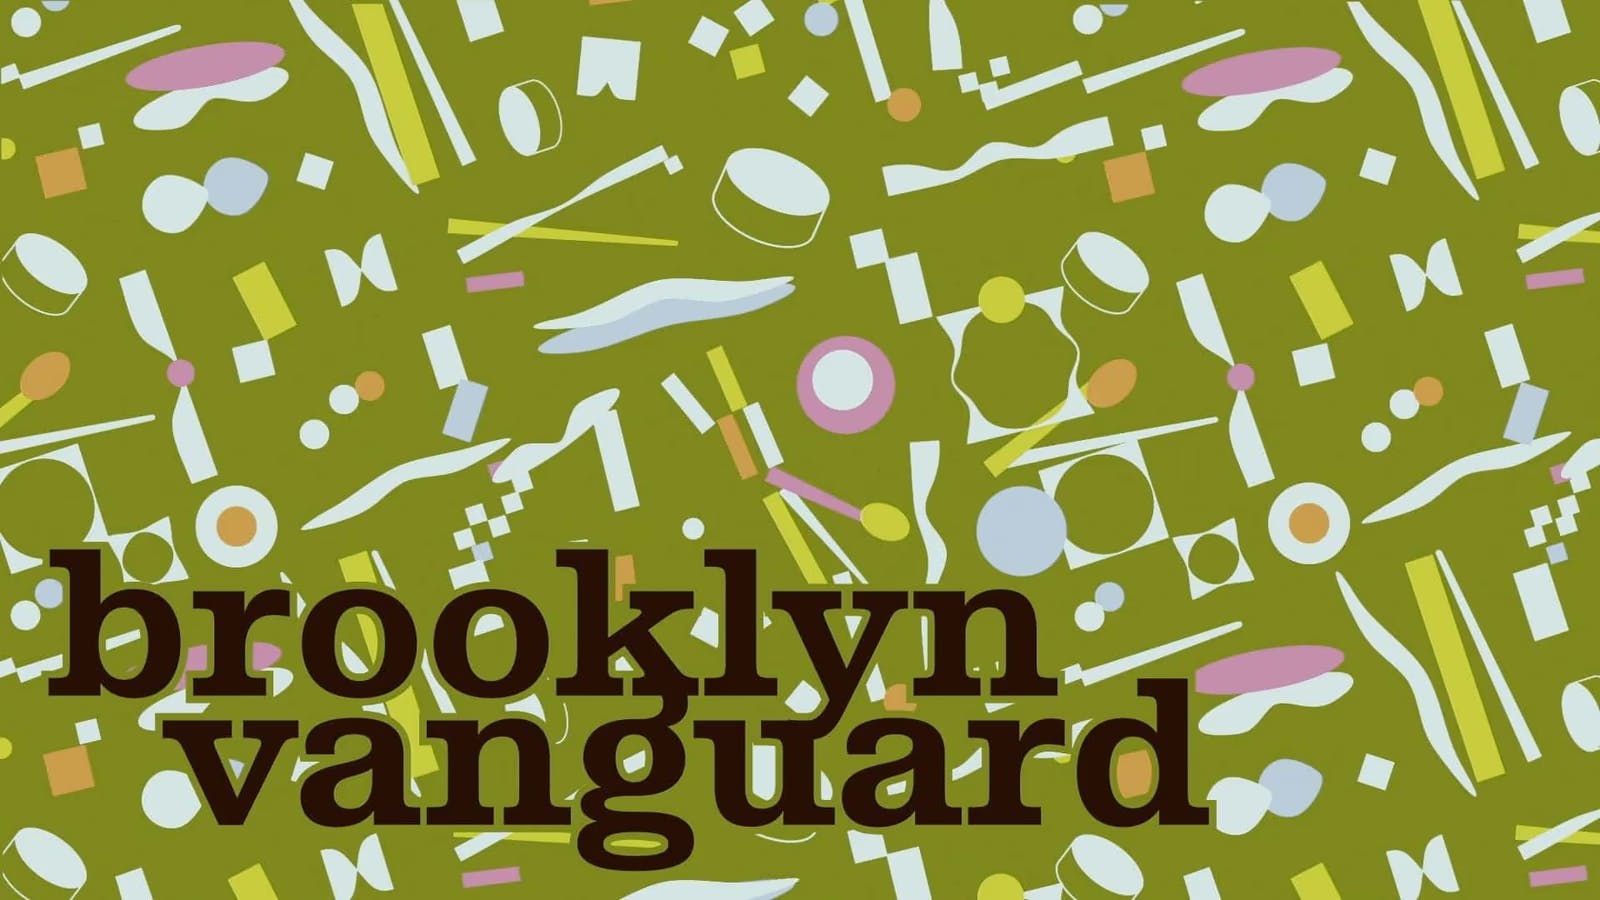 The title 'Brooklyn Vanguard' on a field of green with white, orange, pink, and yellow shapes